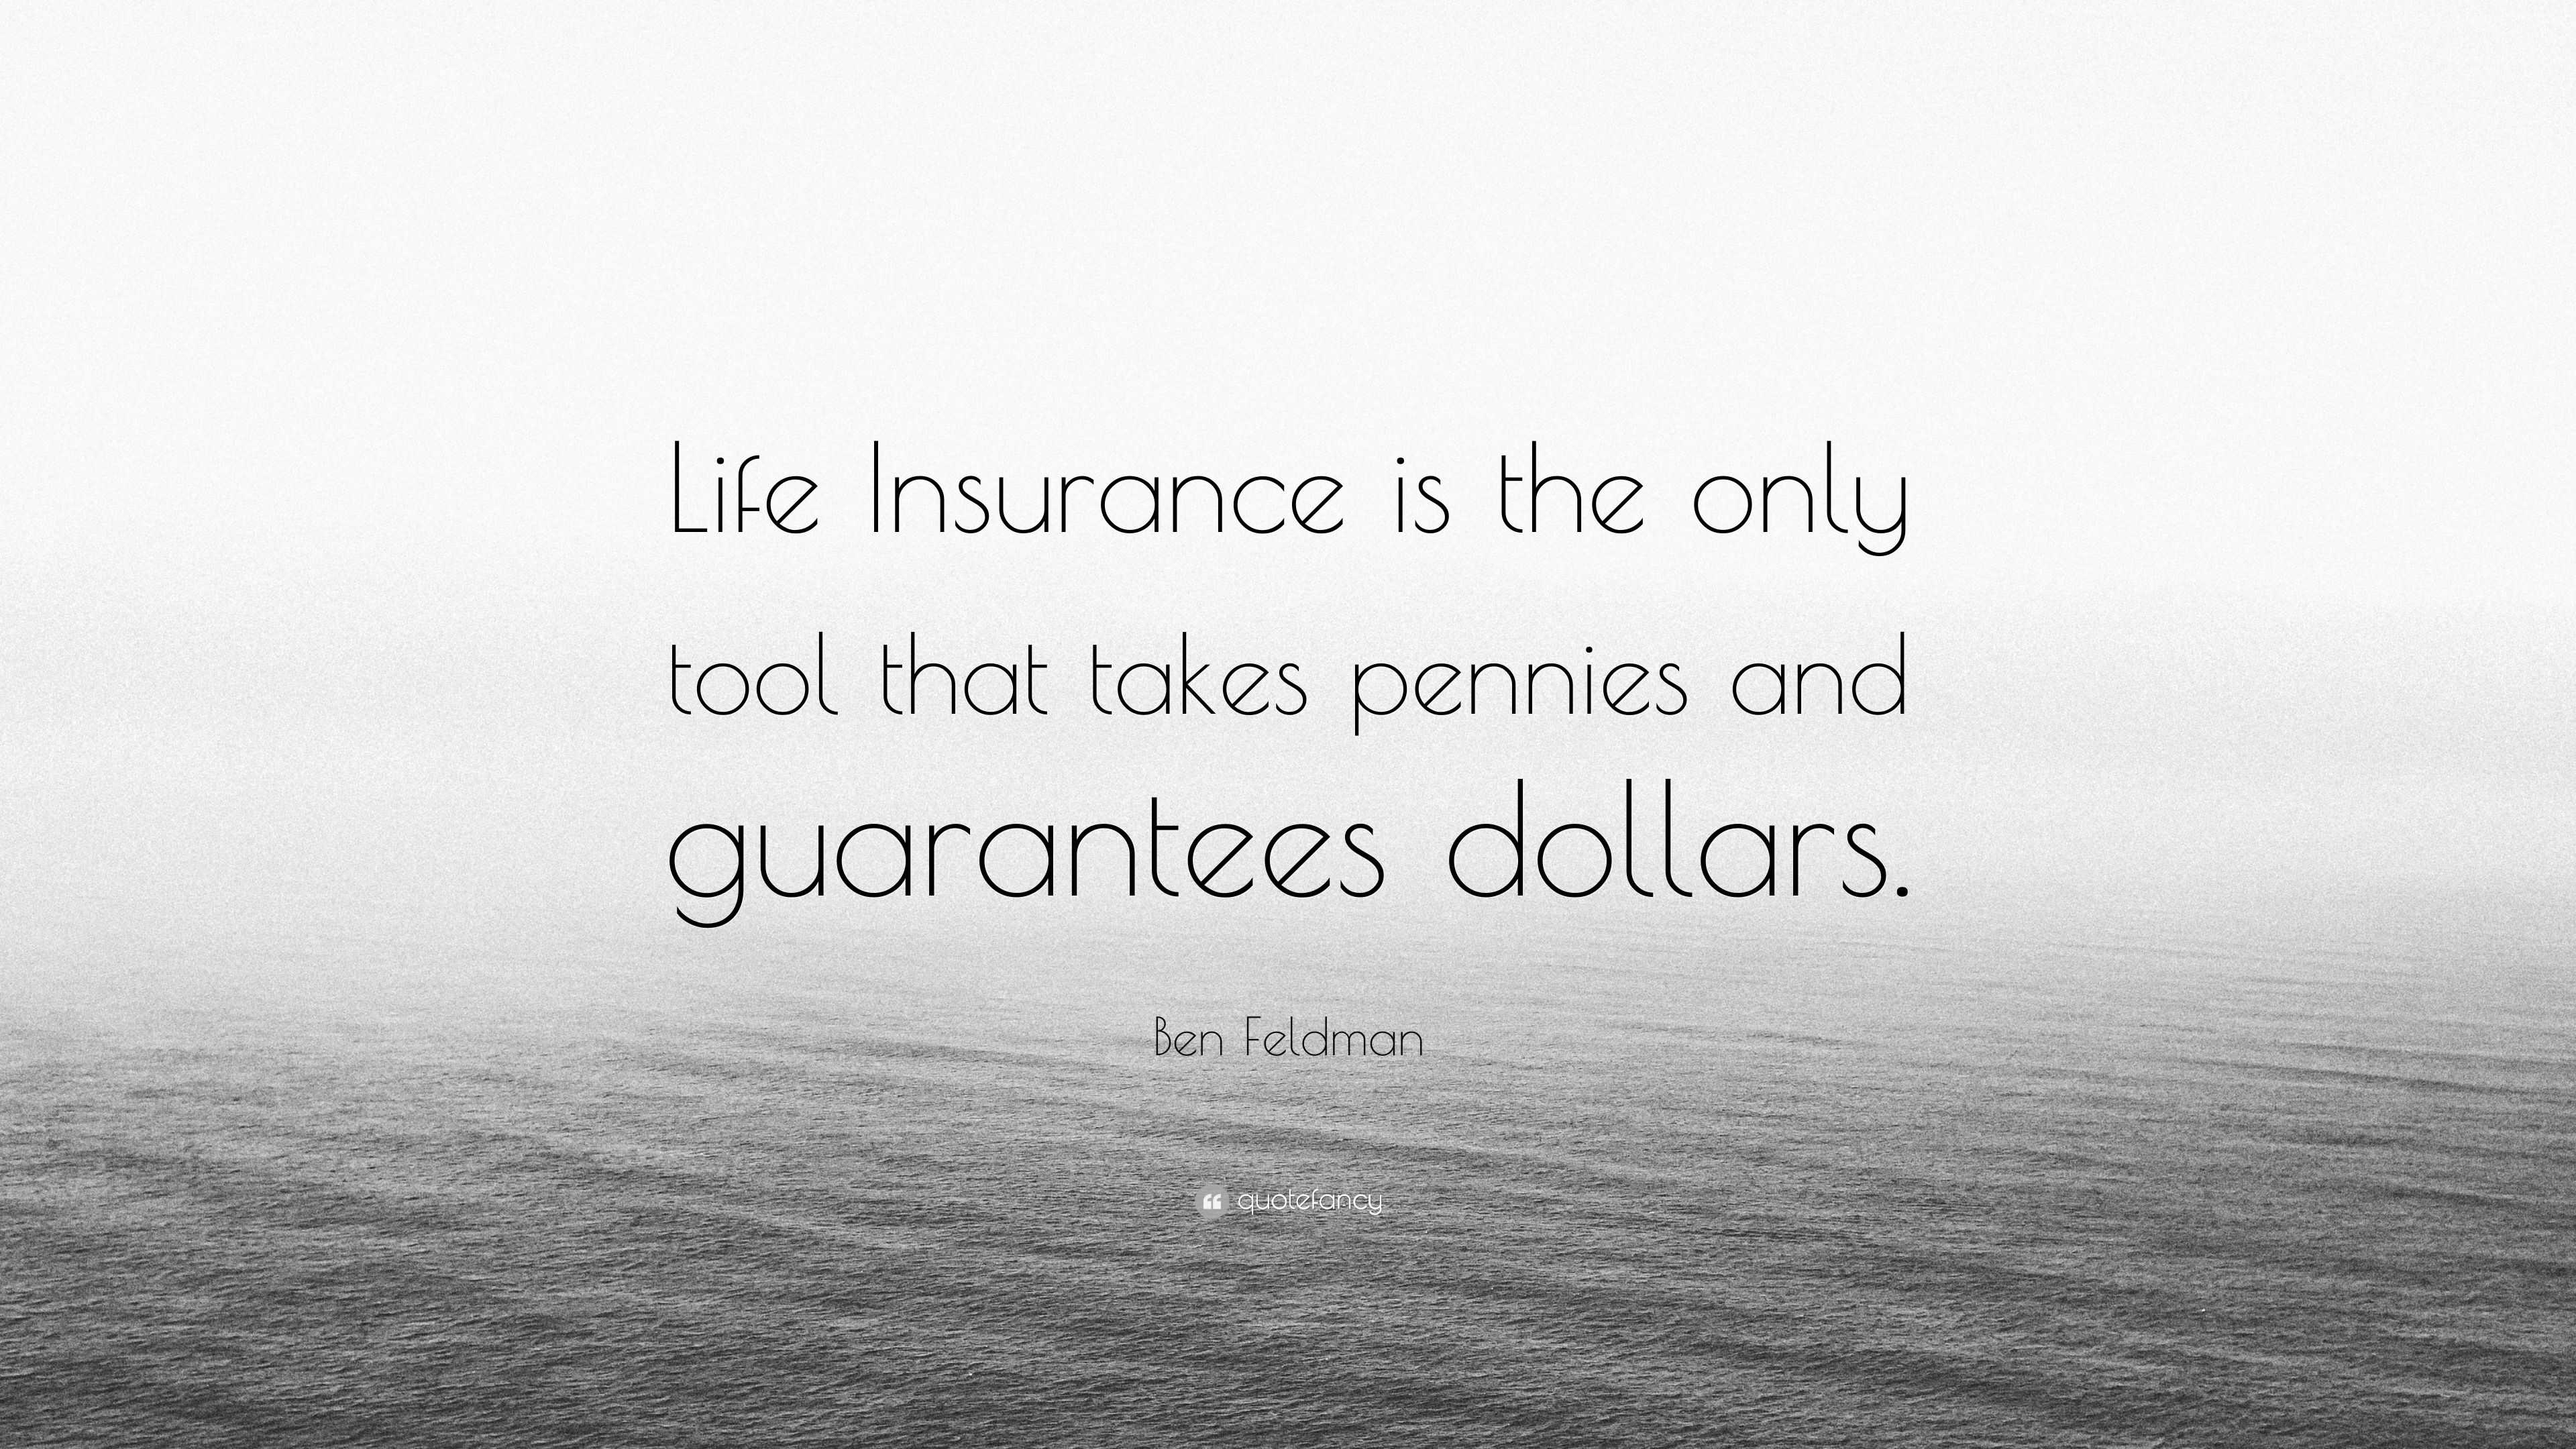 Ben Feldman Quote “Life Insurance is the only tool that takes pennies and guarantees